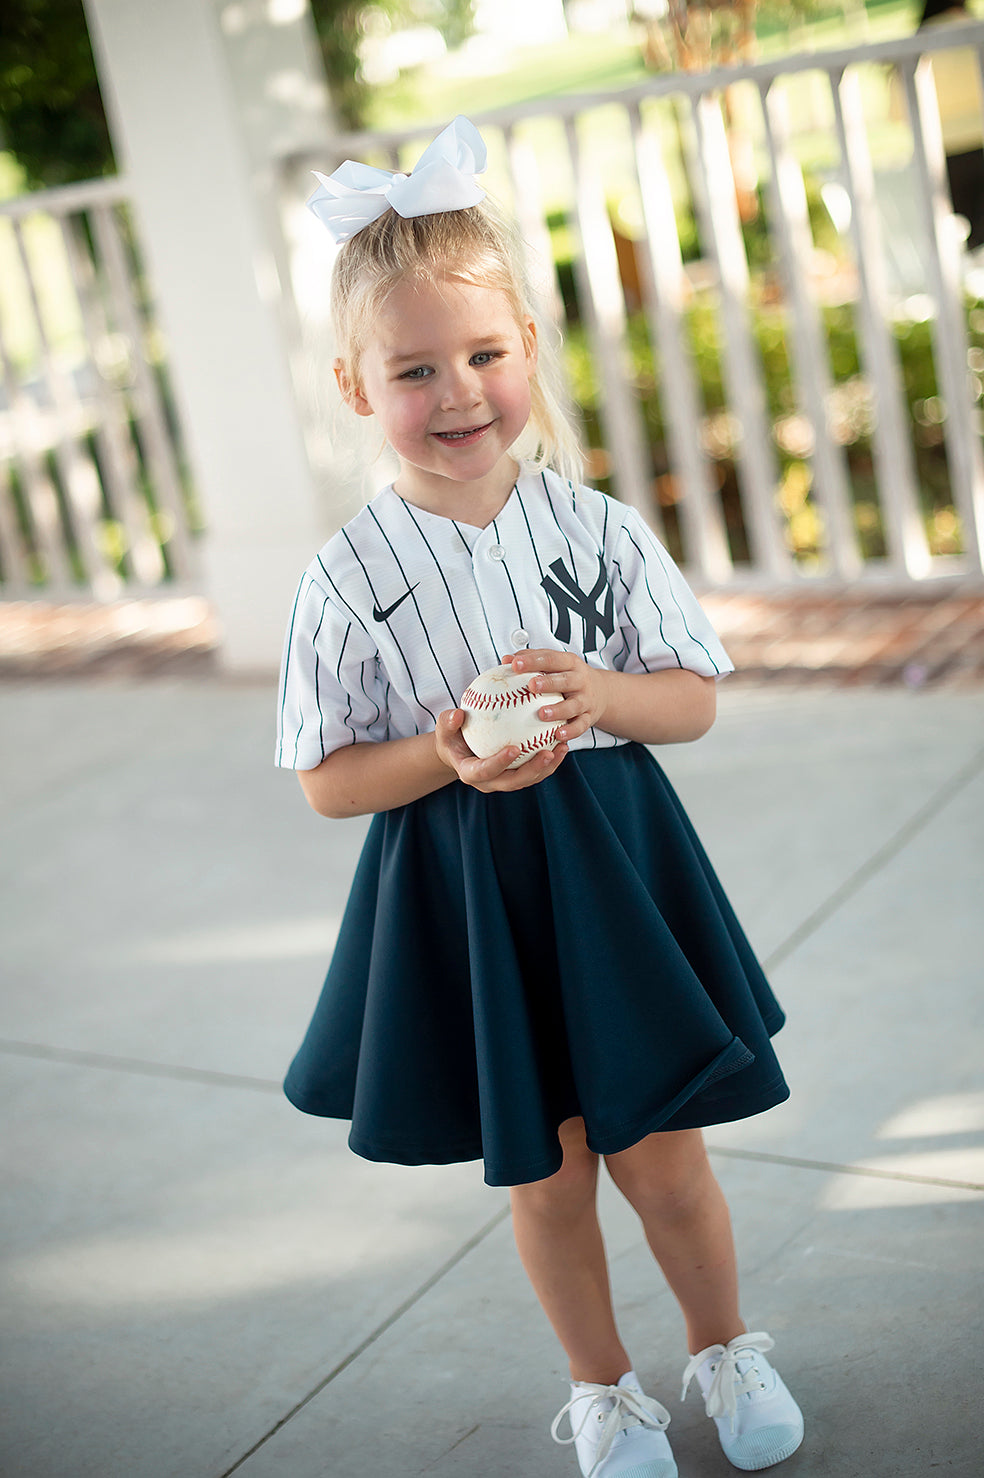 Yankees Baby Outfit Yankees Girl's Outfit Yankees 